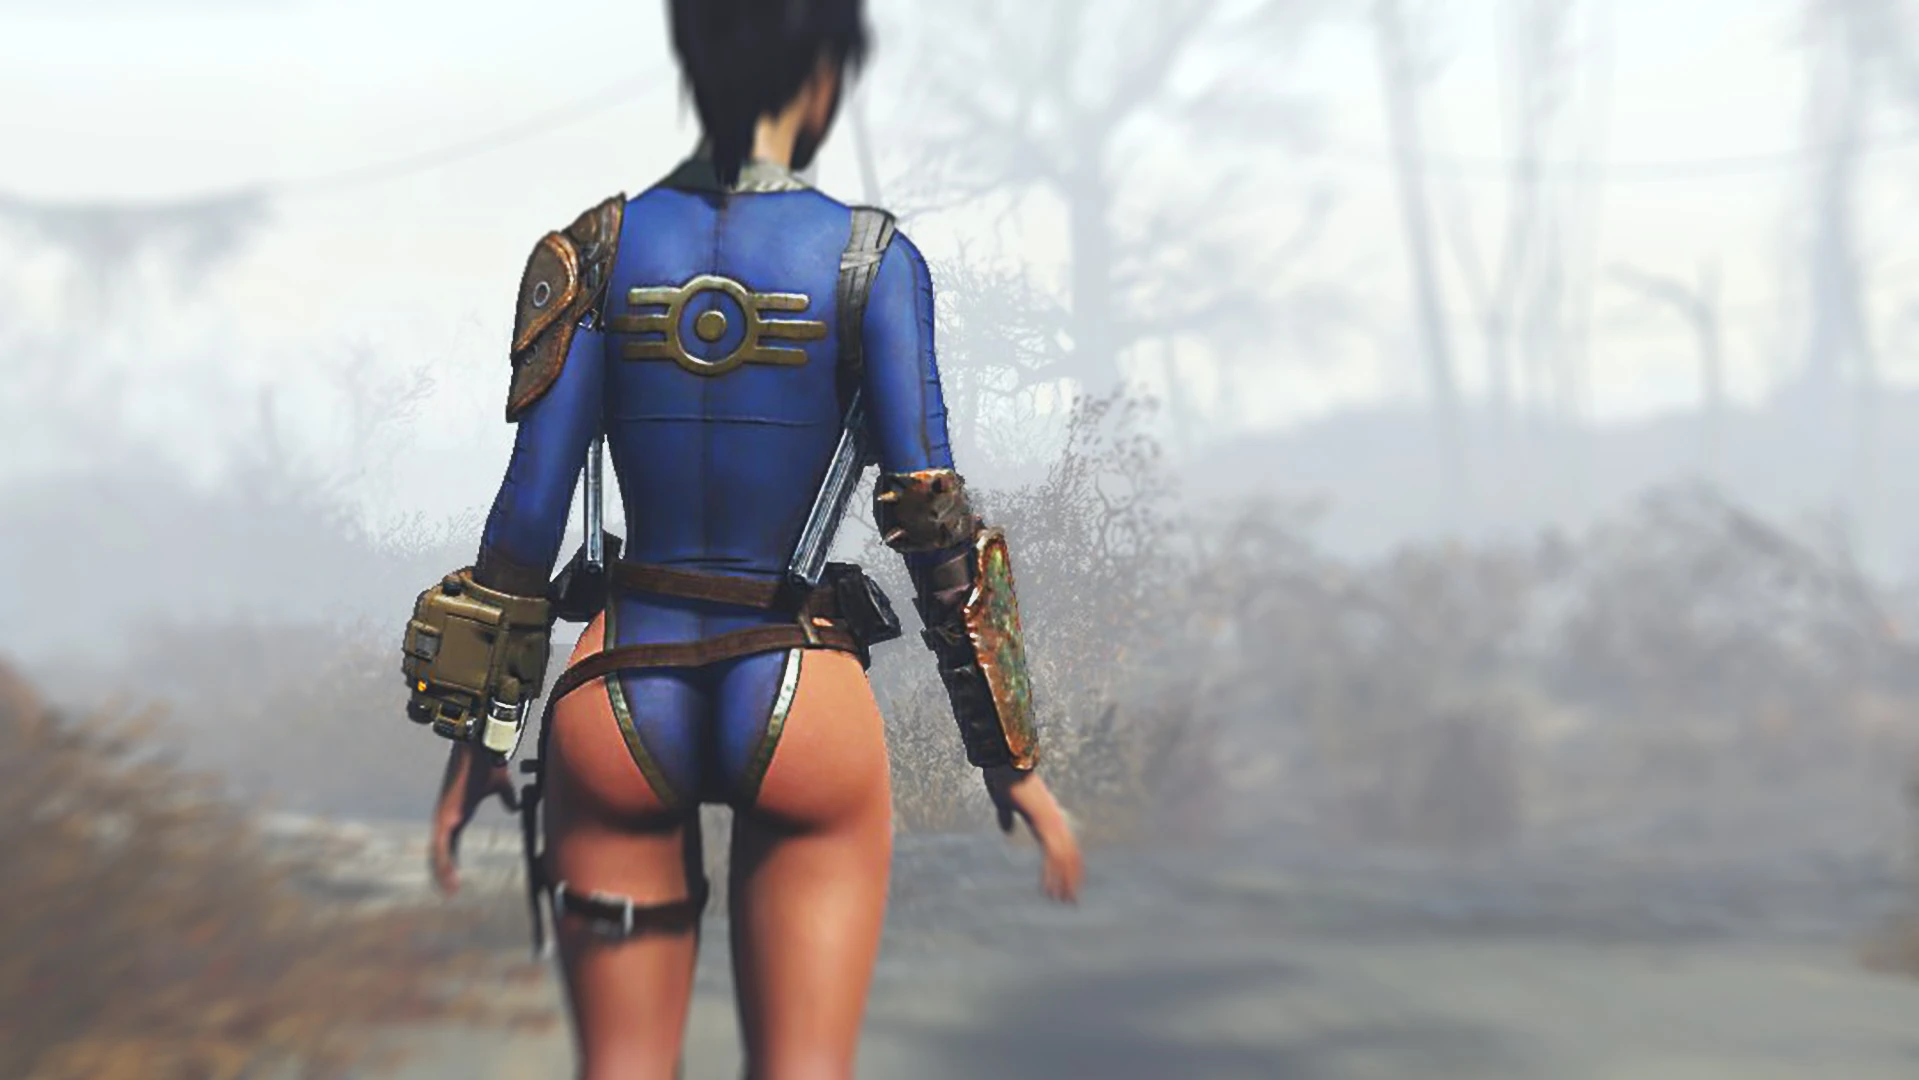 Fallout 4 armored vault suit фото 70